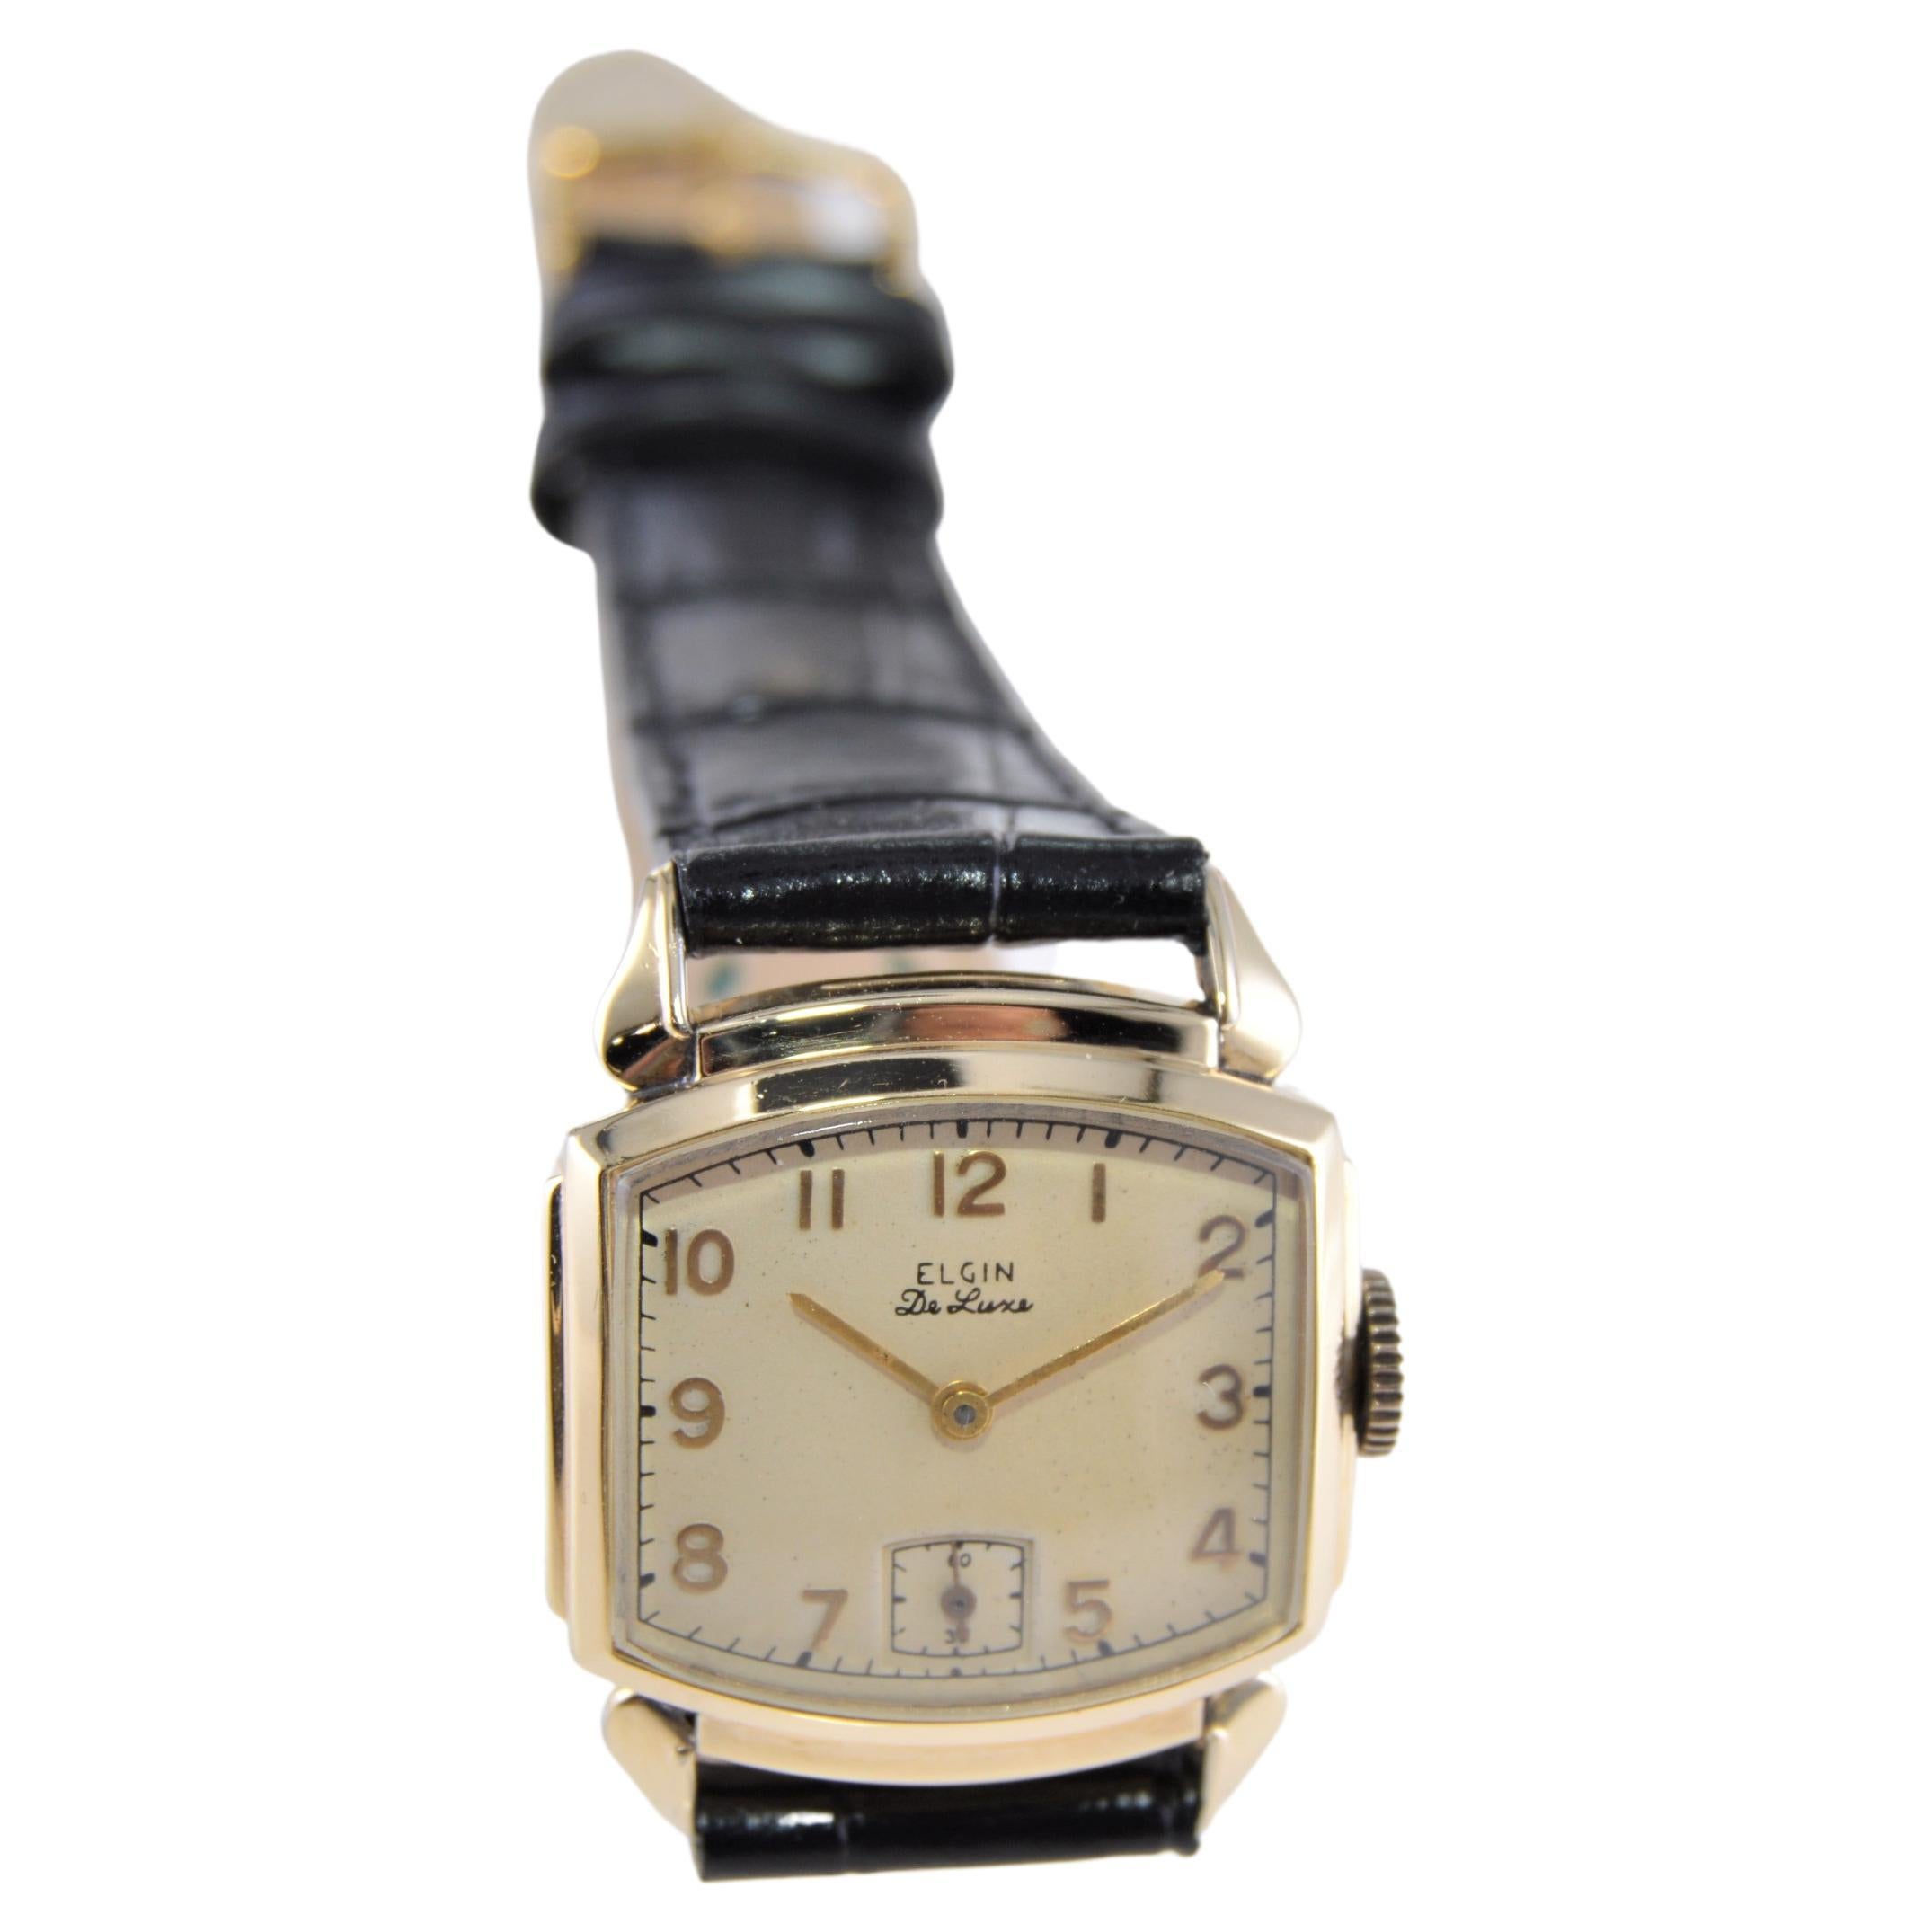 Elgin Gold Filled Art Deco Watch with Original Dial from 1940's In Excellent Condition For Sale In Long Beach, CA